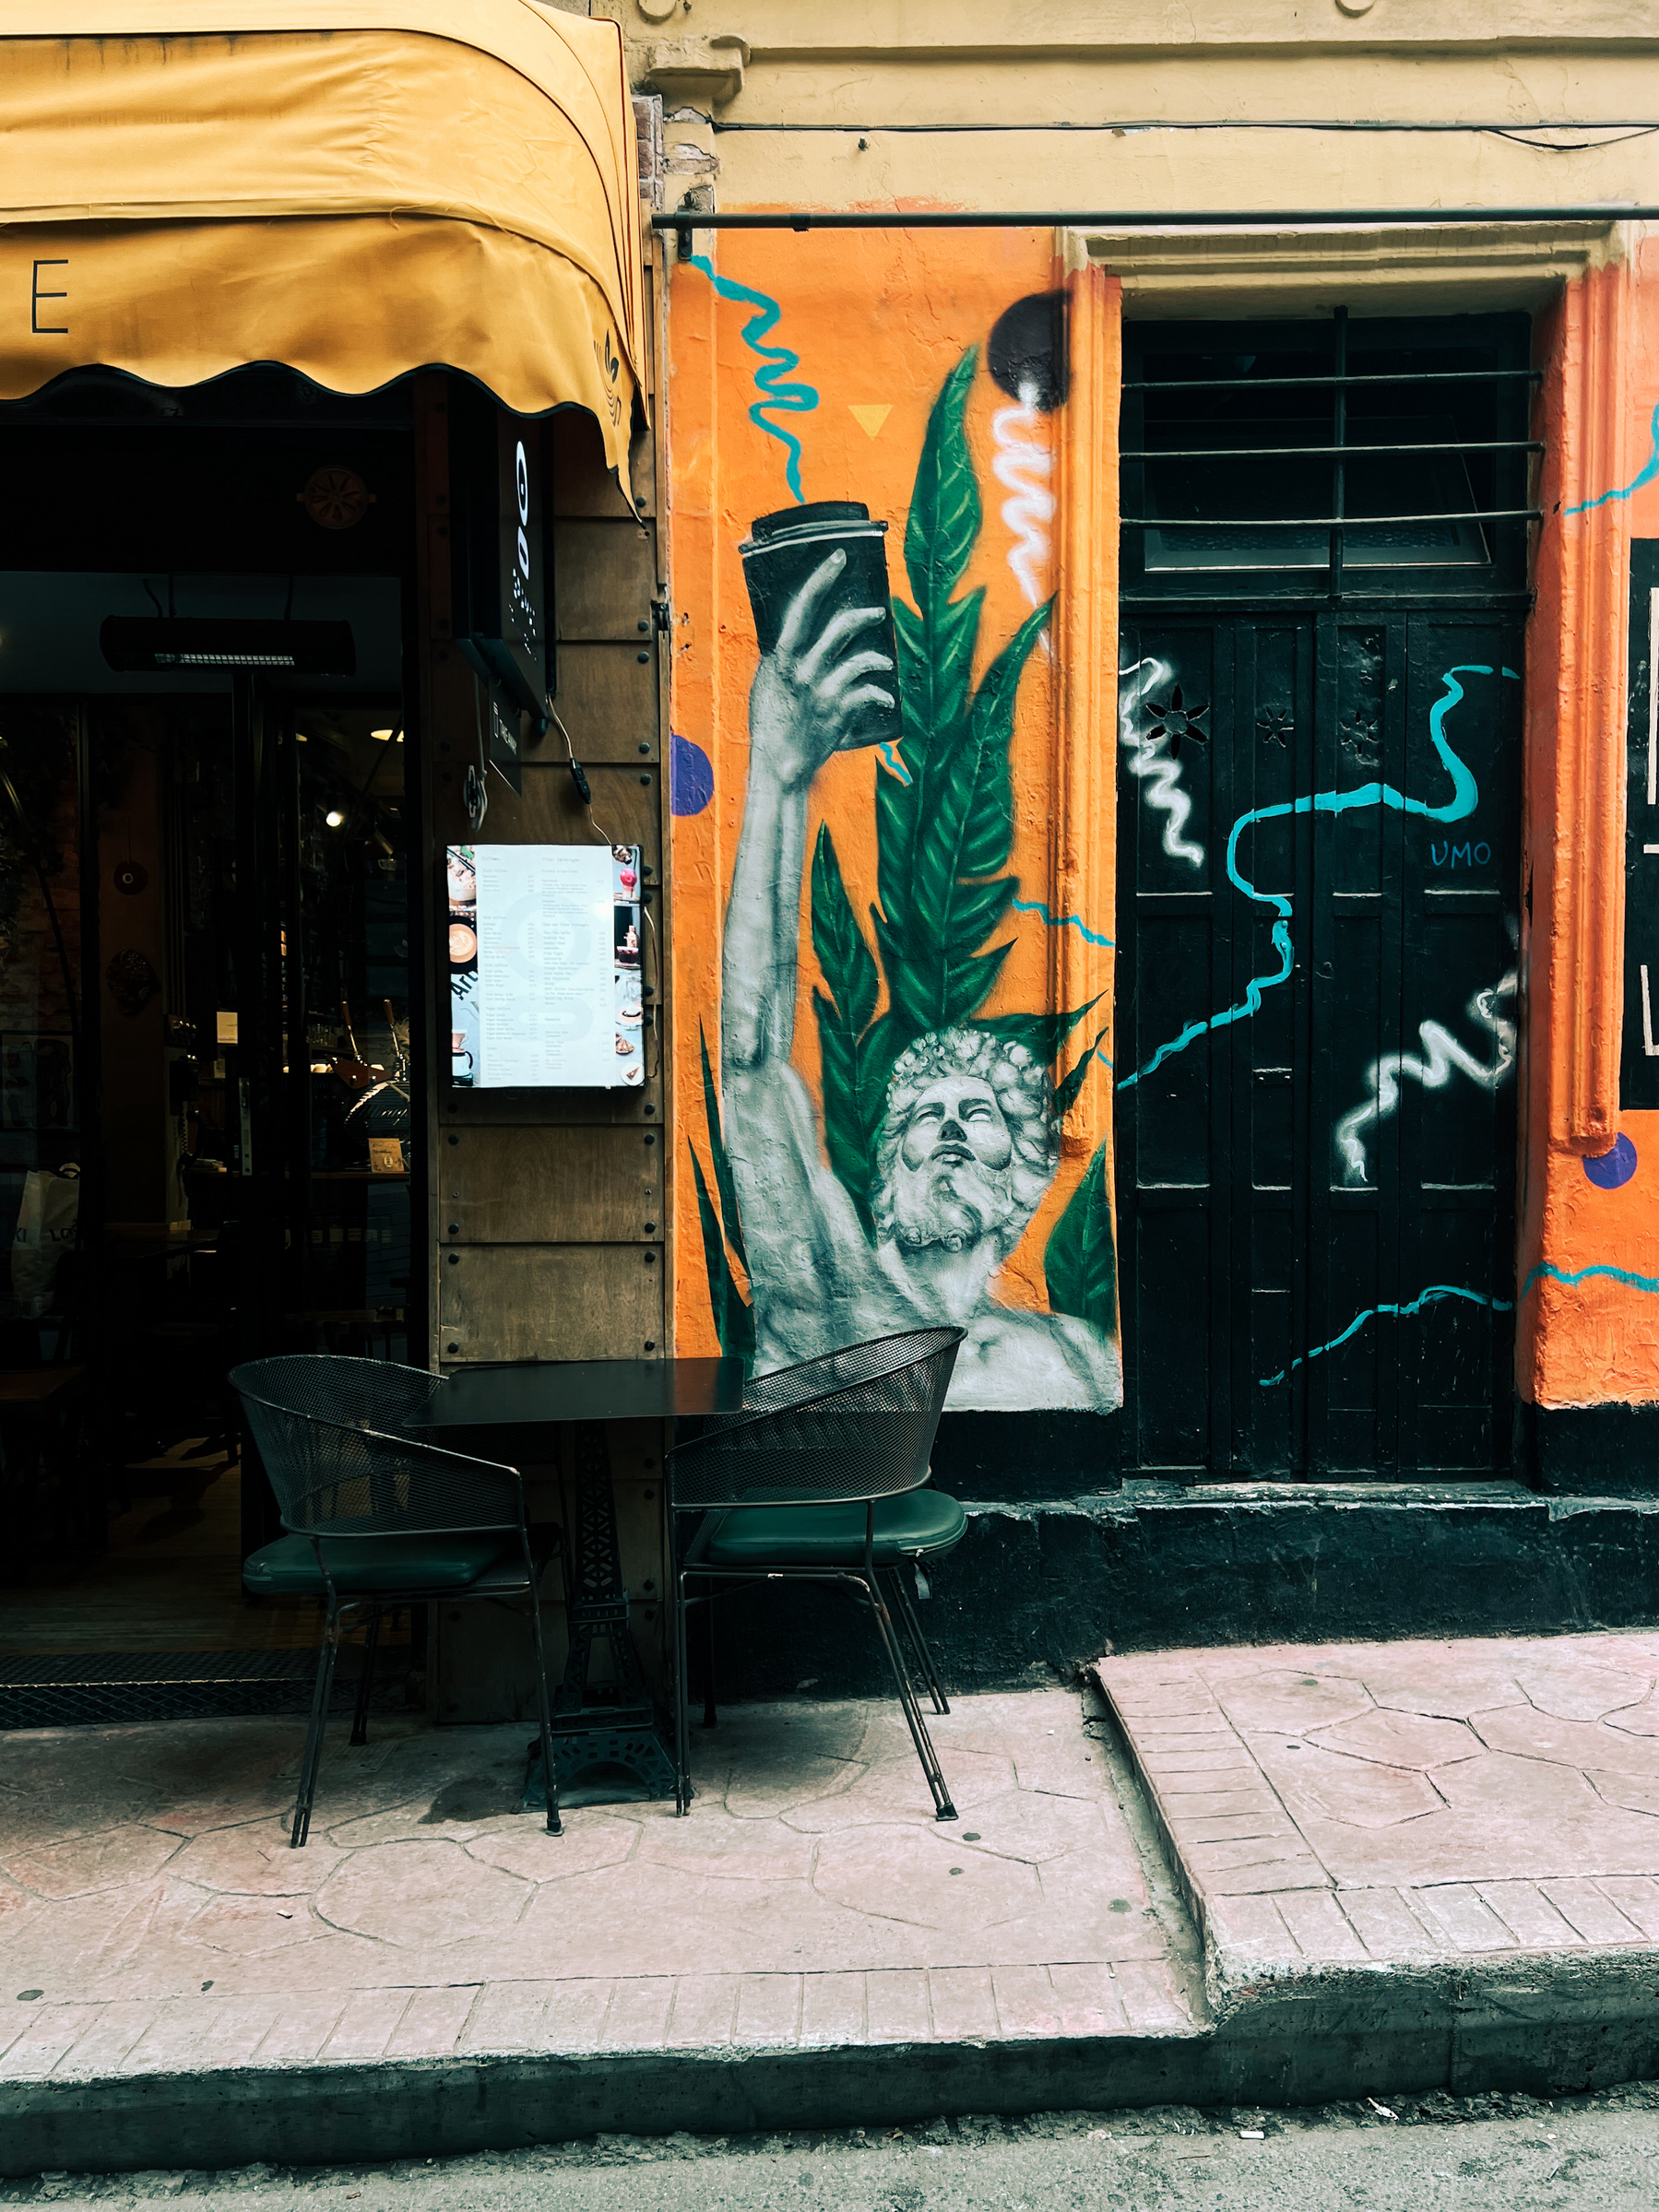 A colorful street mural depicting a figure holding a coffee cup alongside green foliage, with a bistro table and two chairs set up in front of it on the sidewalk.